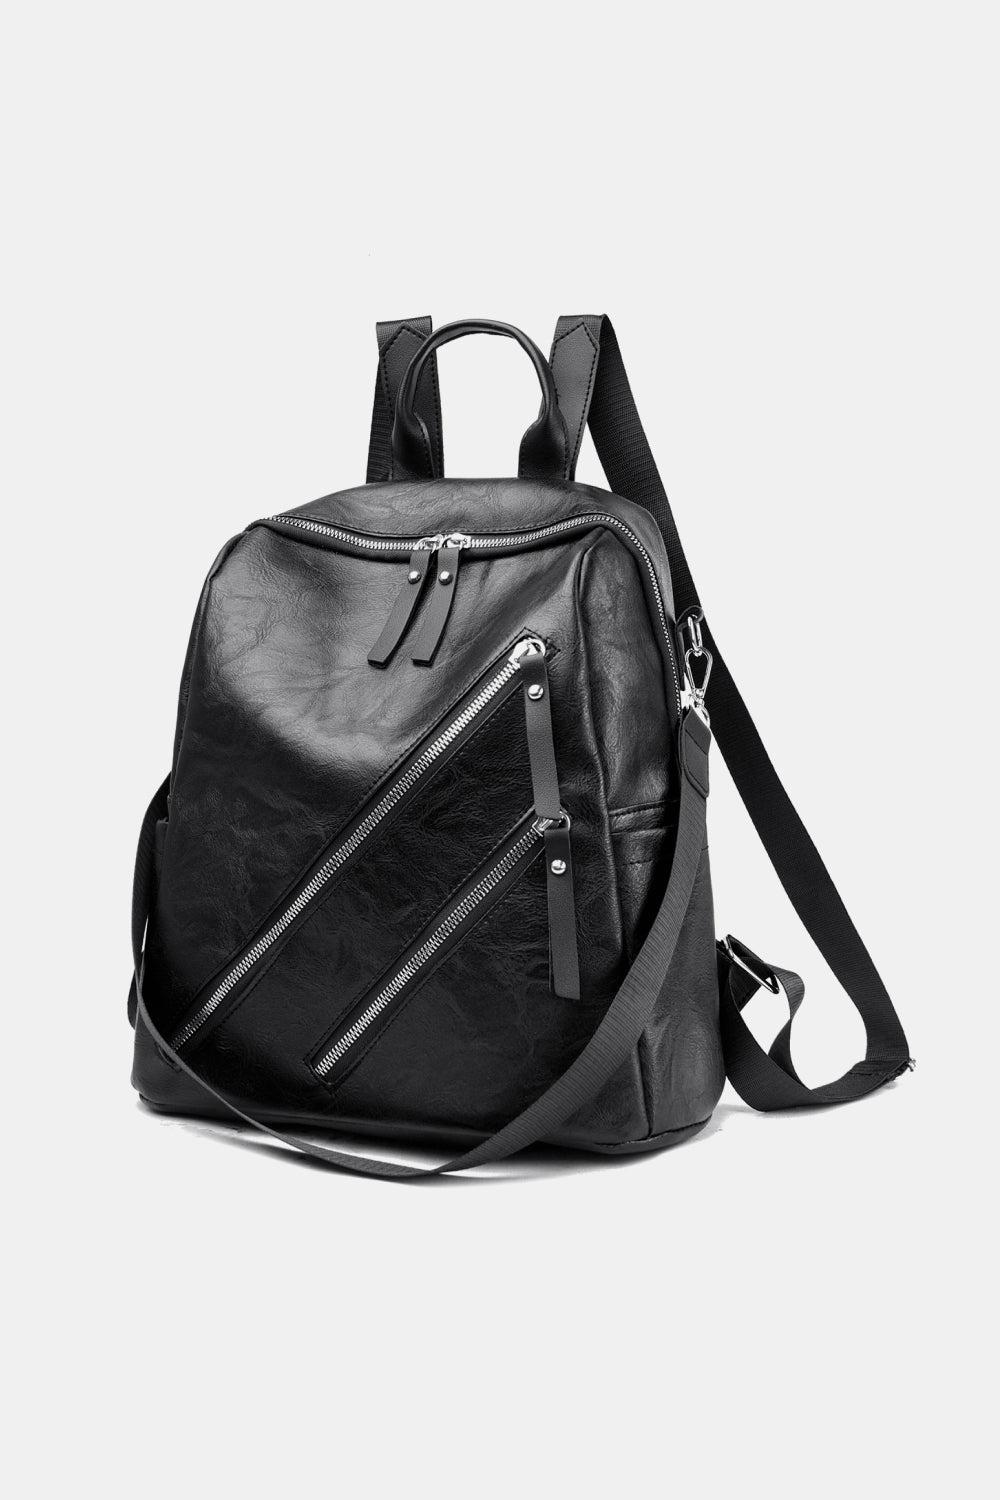 PU Leather Convertible Backpack Additional Options Available